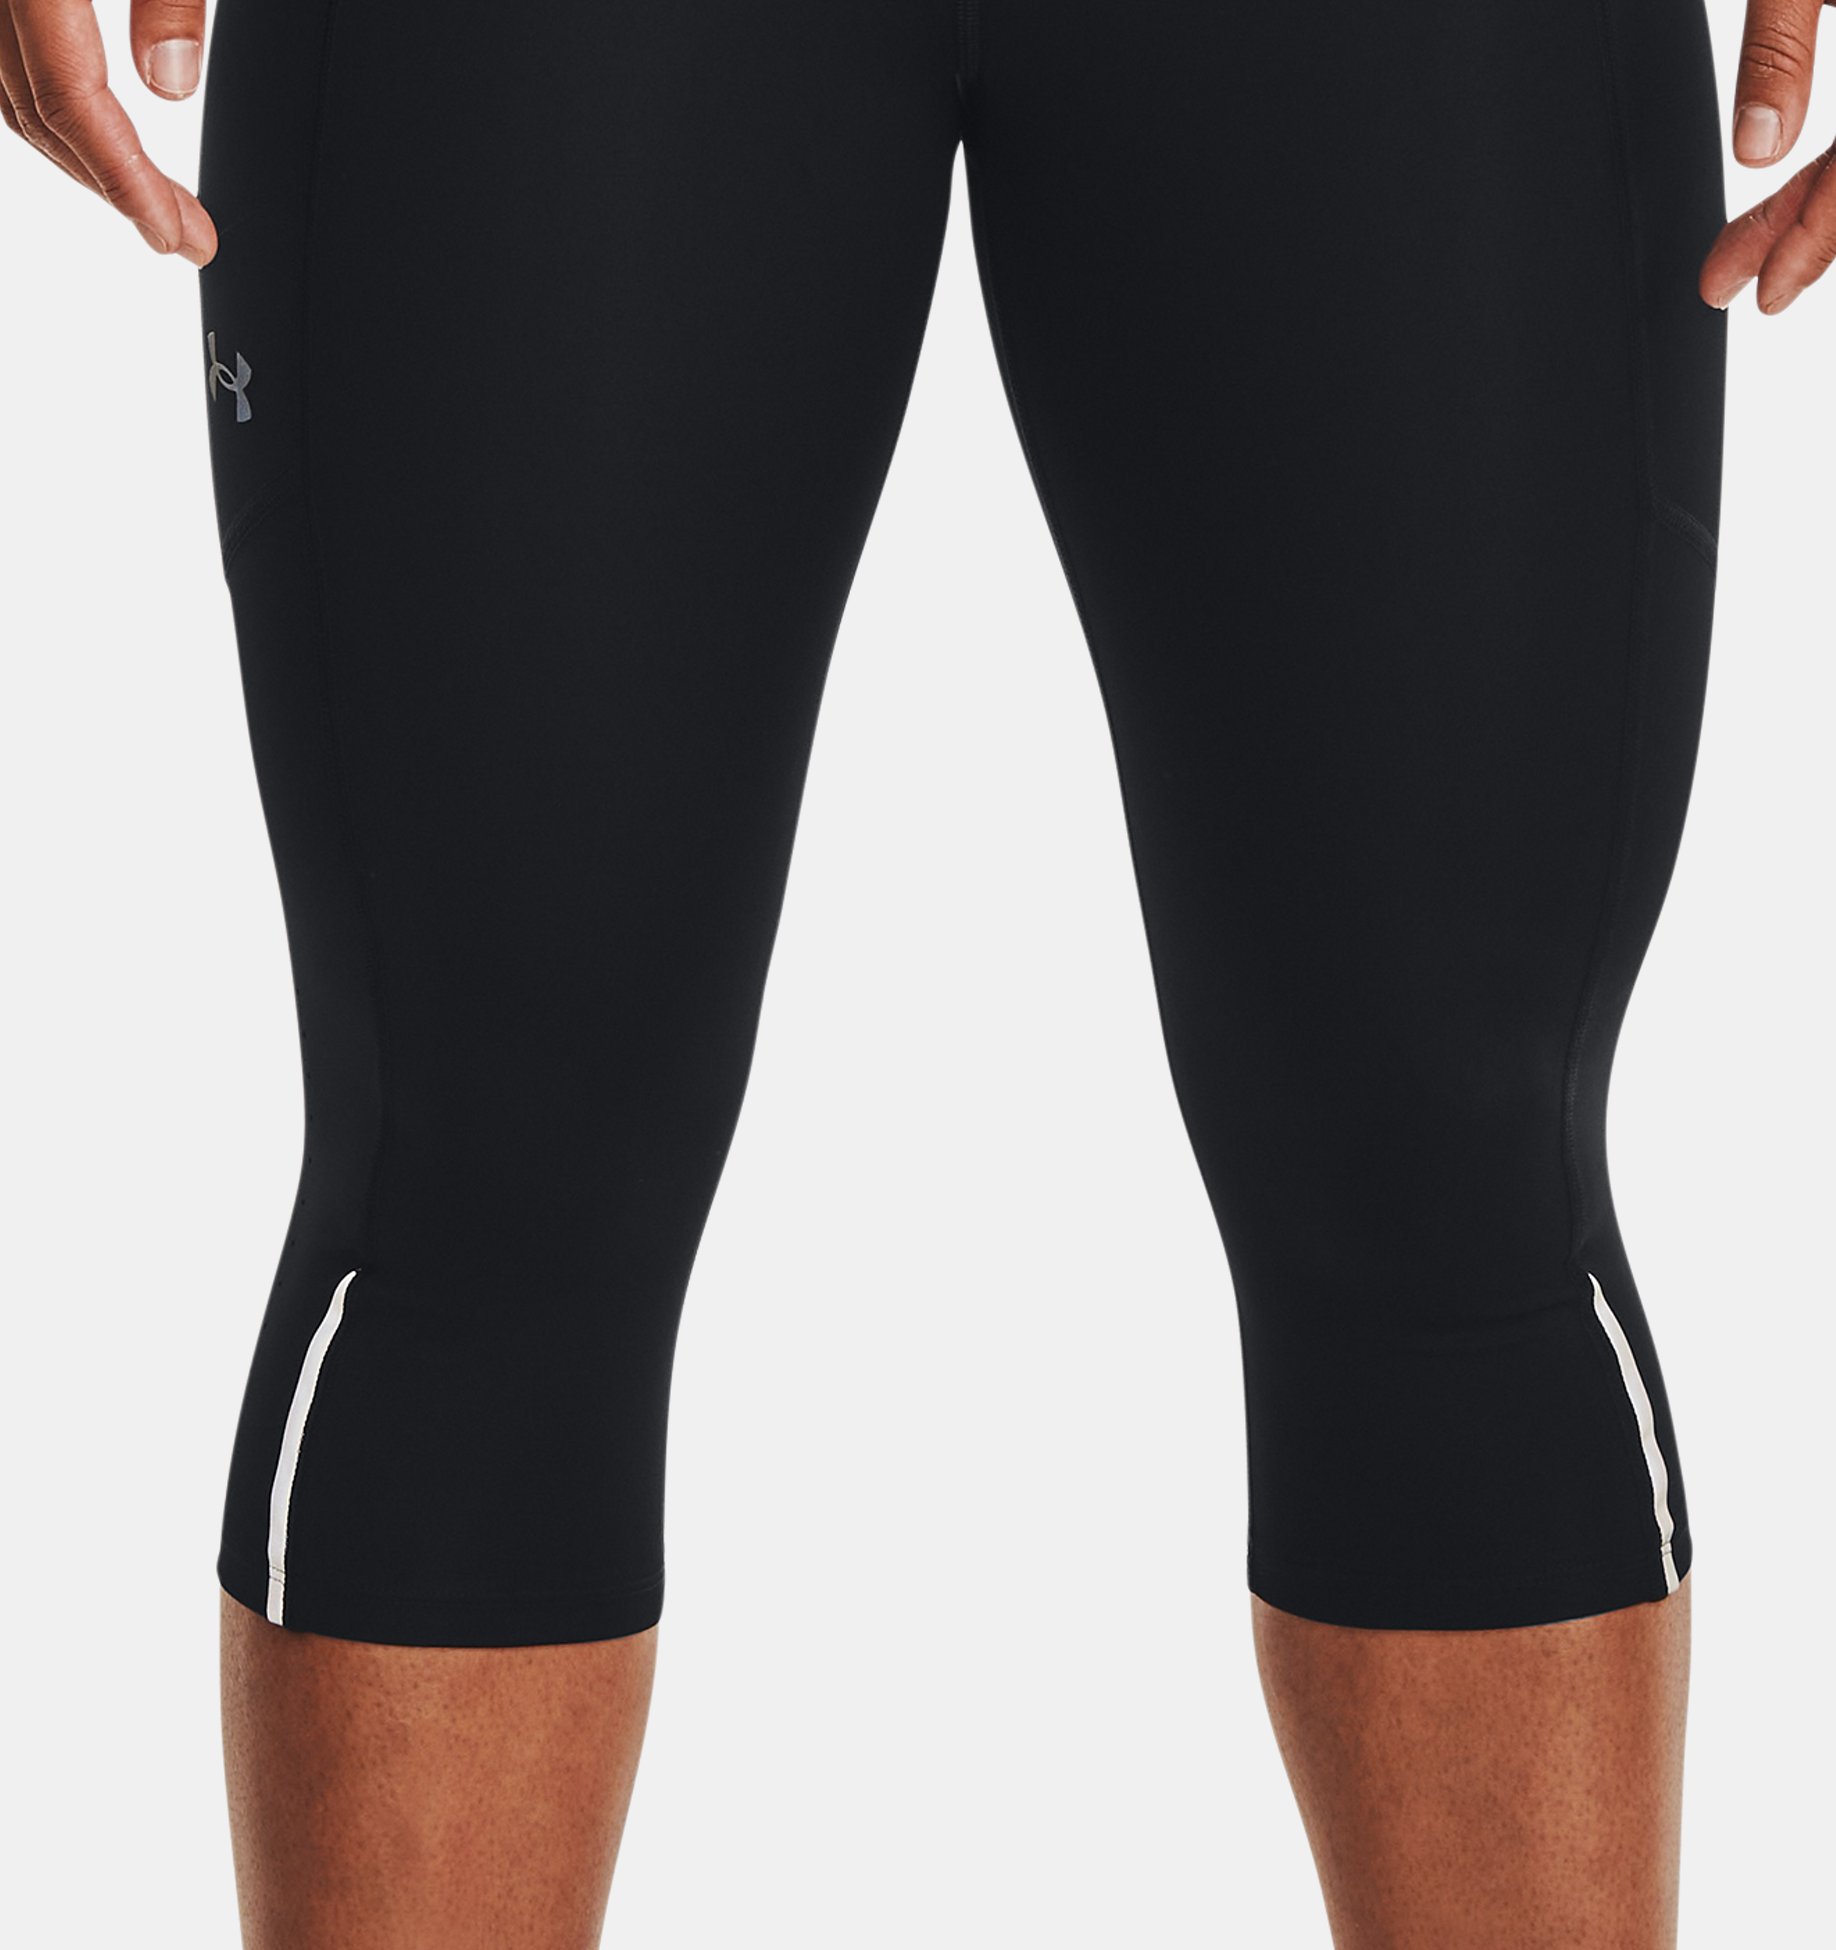 Women's Leggings & Capris - Running Tights - Compression Fit - Under Armour  AU